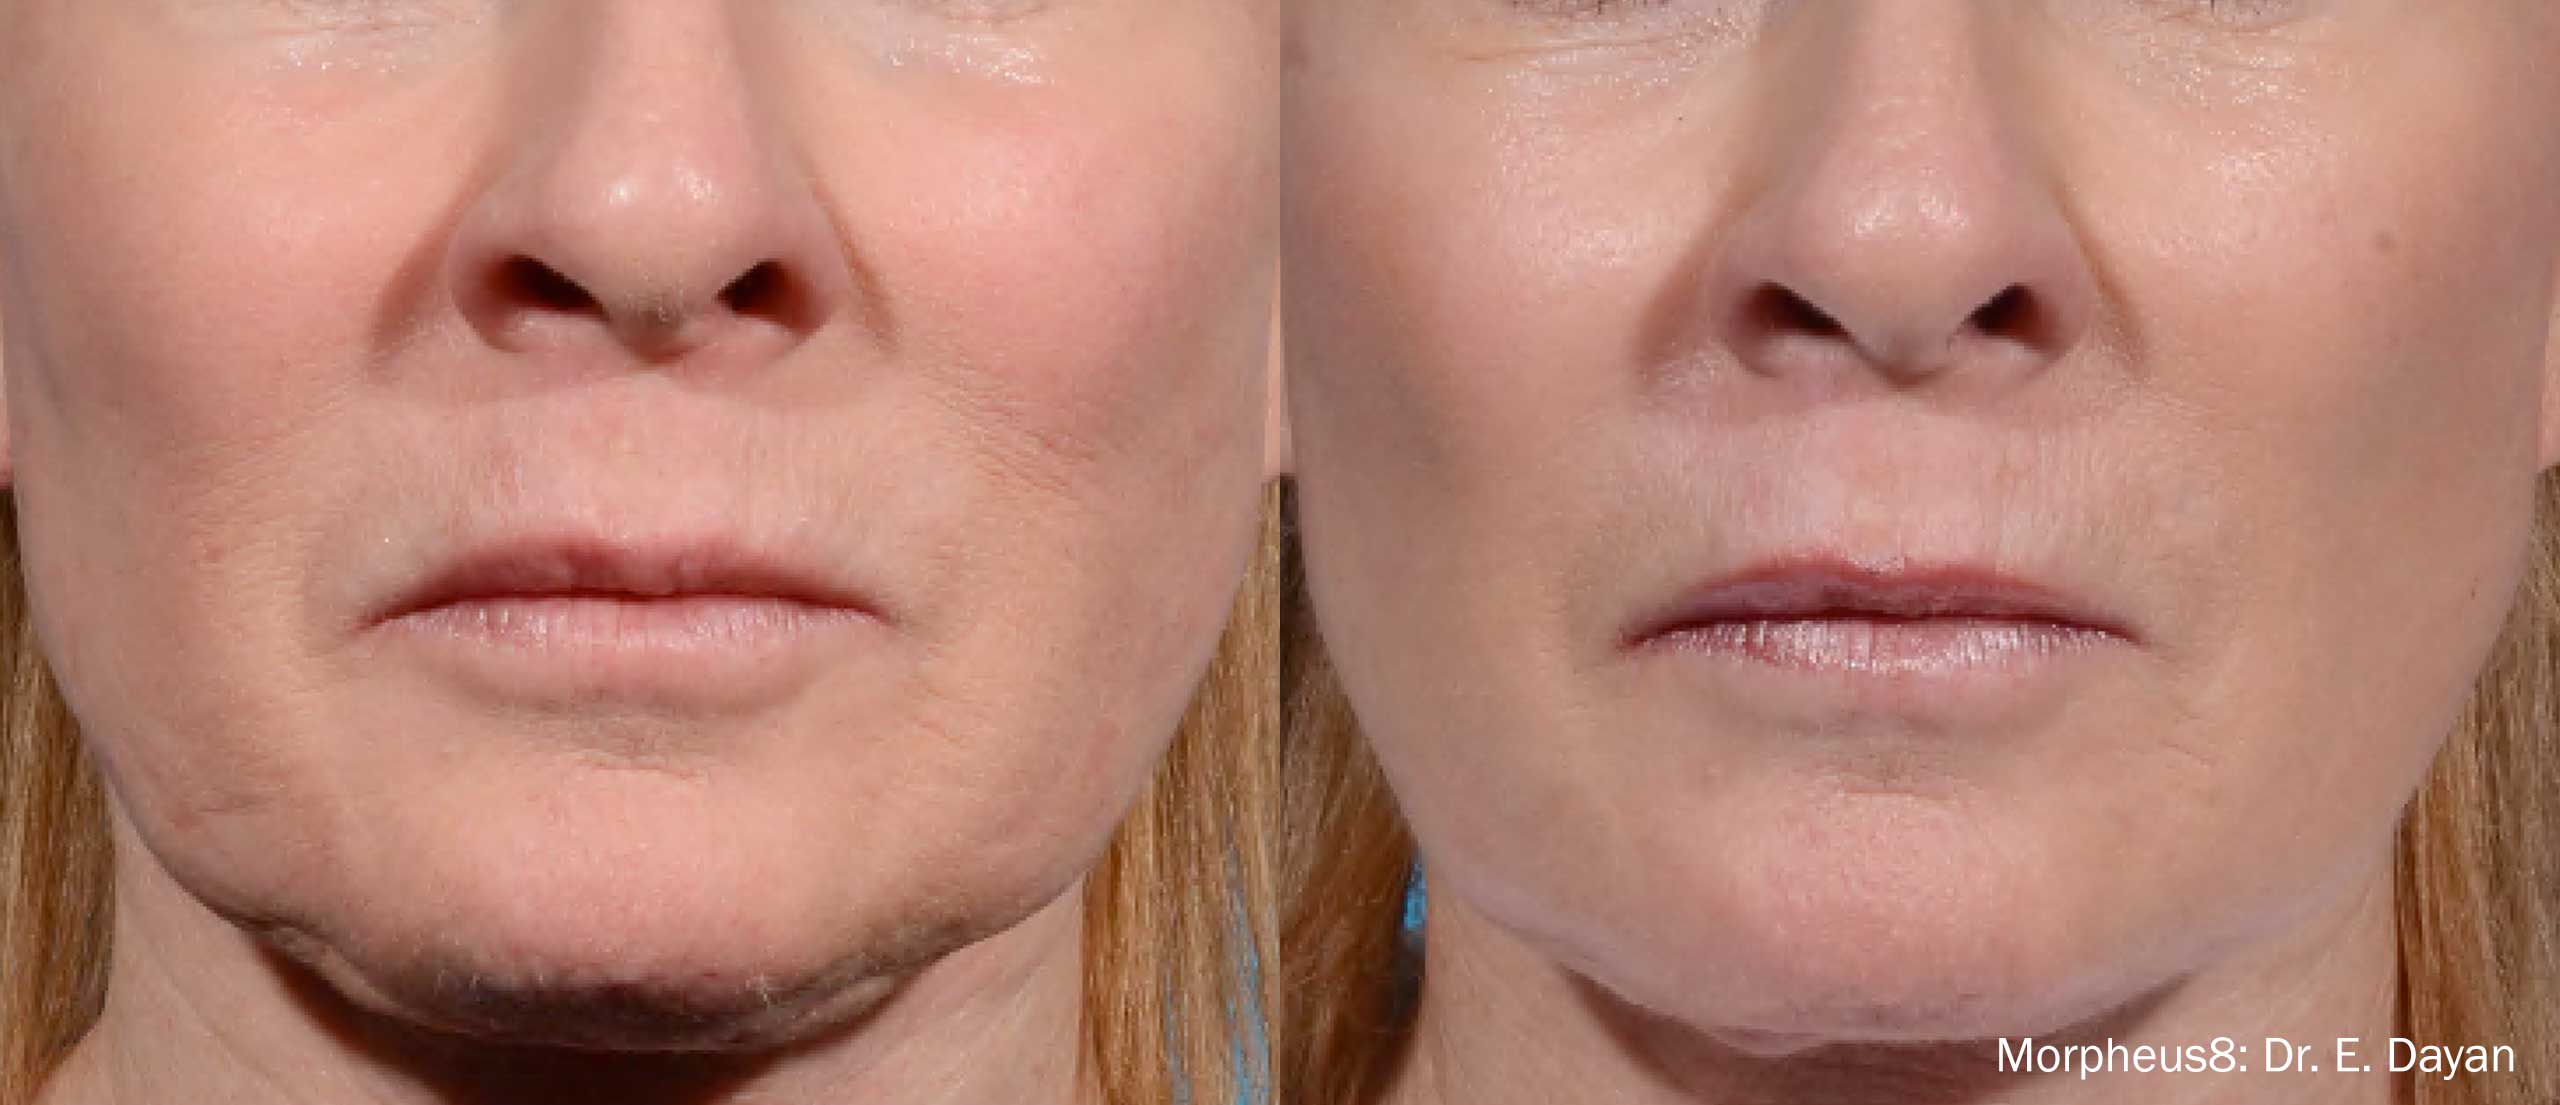 skin tightening with morpheus8 results